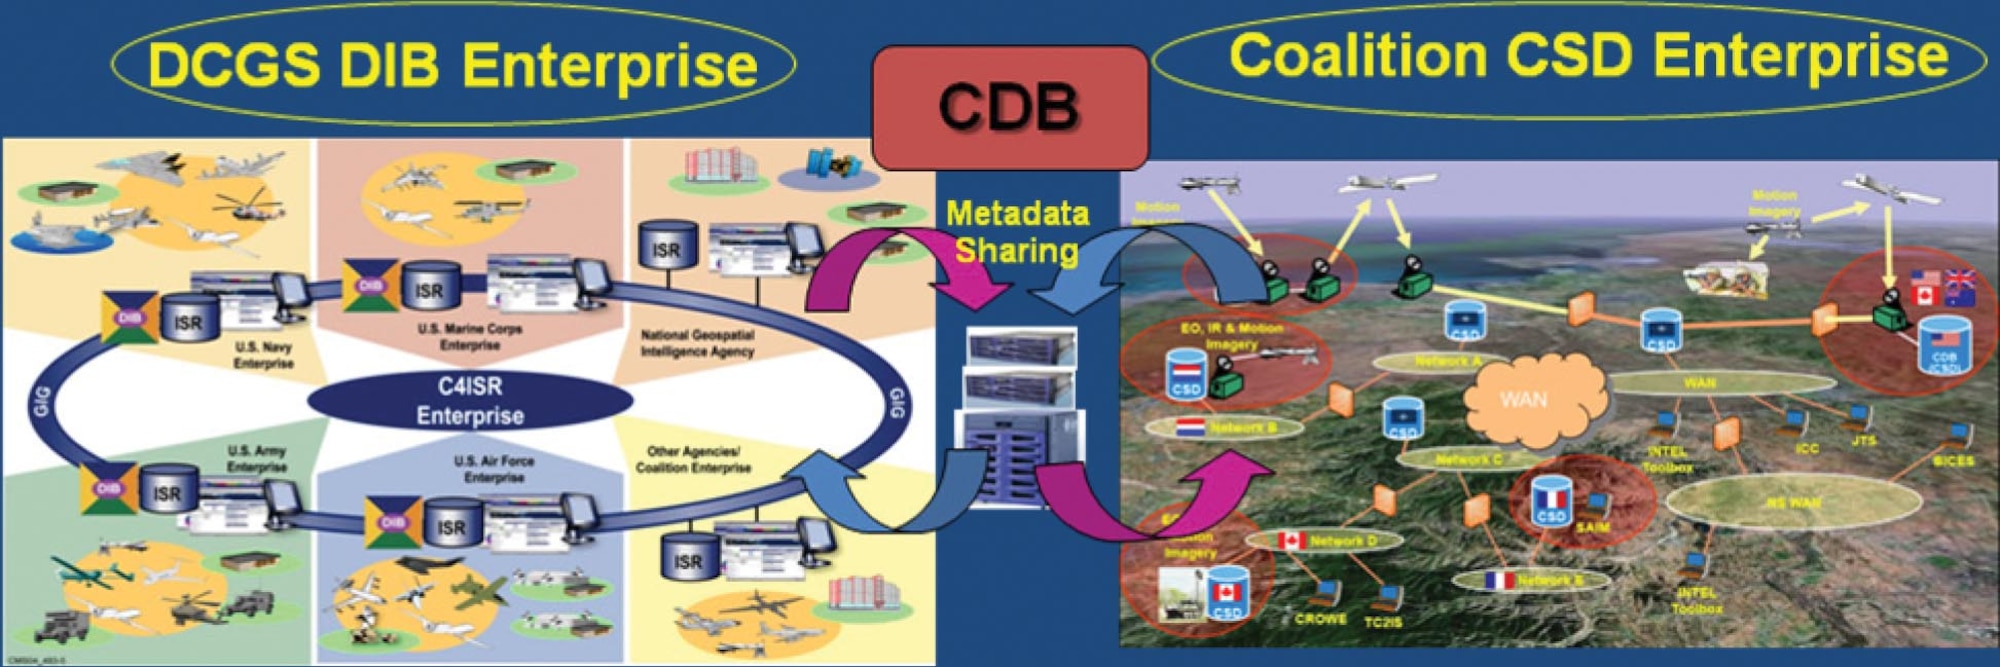 Coalition data broker enables metadata sharing between distributed common ground station and the CSD.  AFRL Image. 